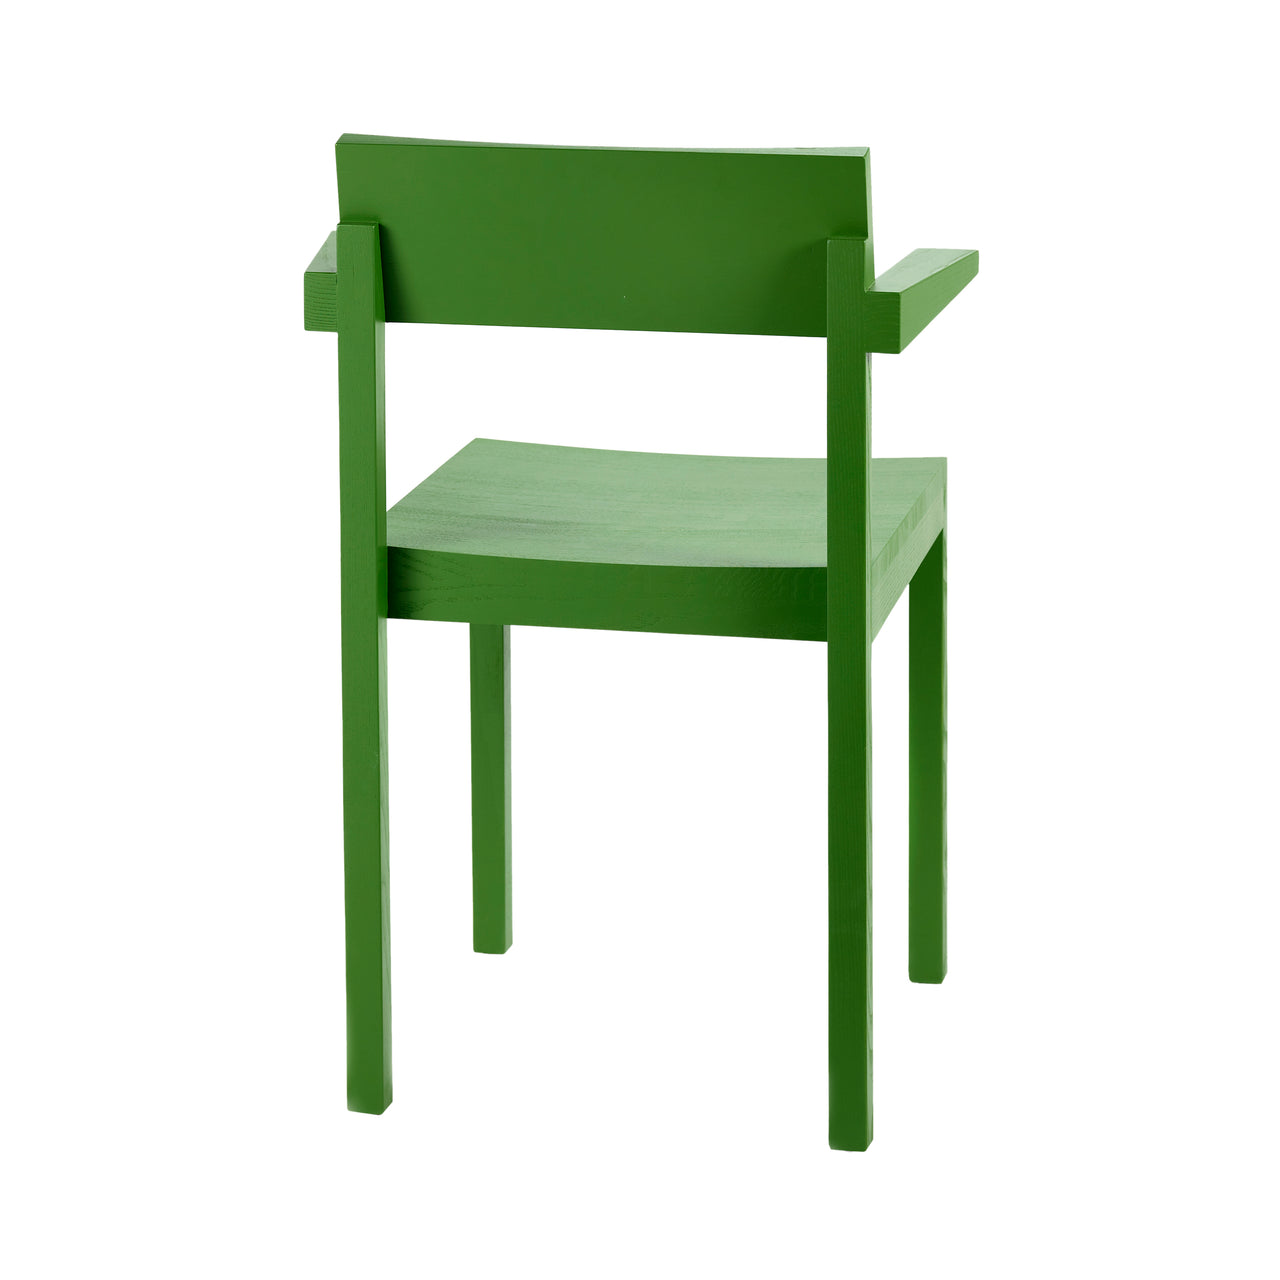 Silent Chair: With Arm + Grass